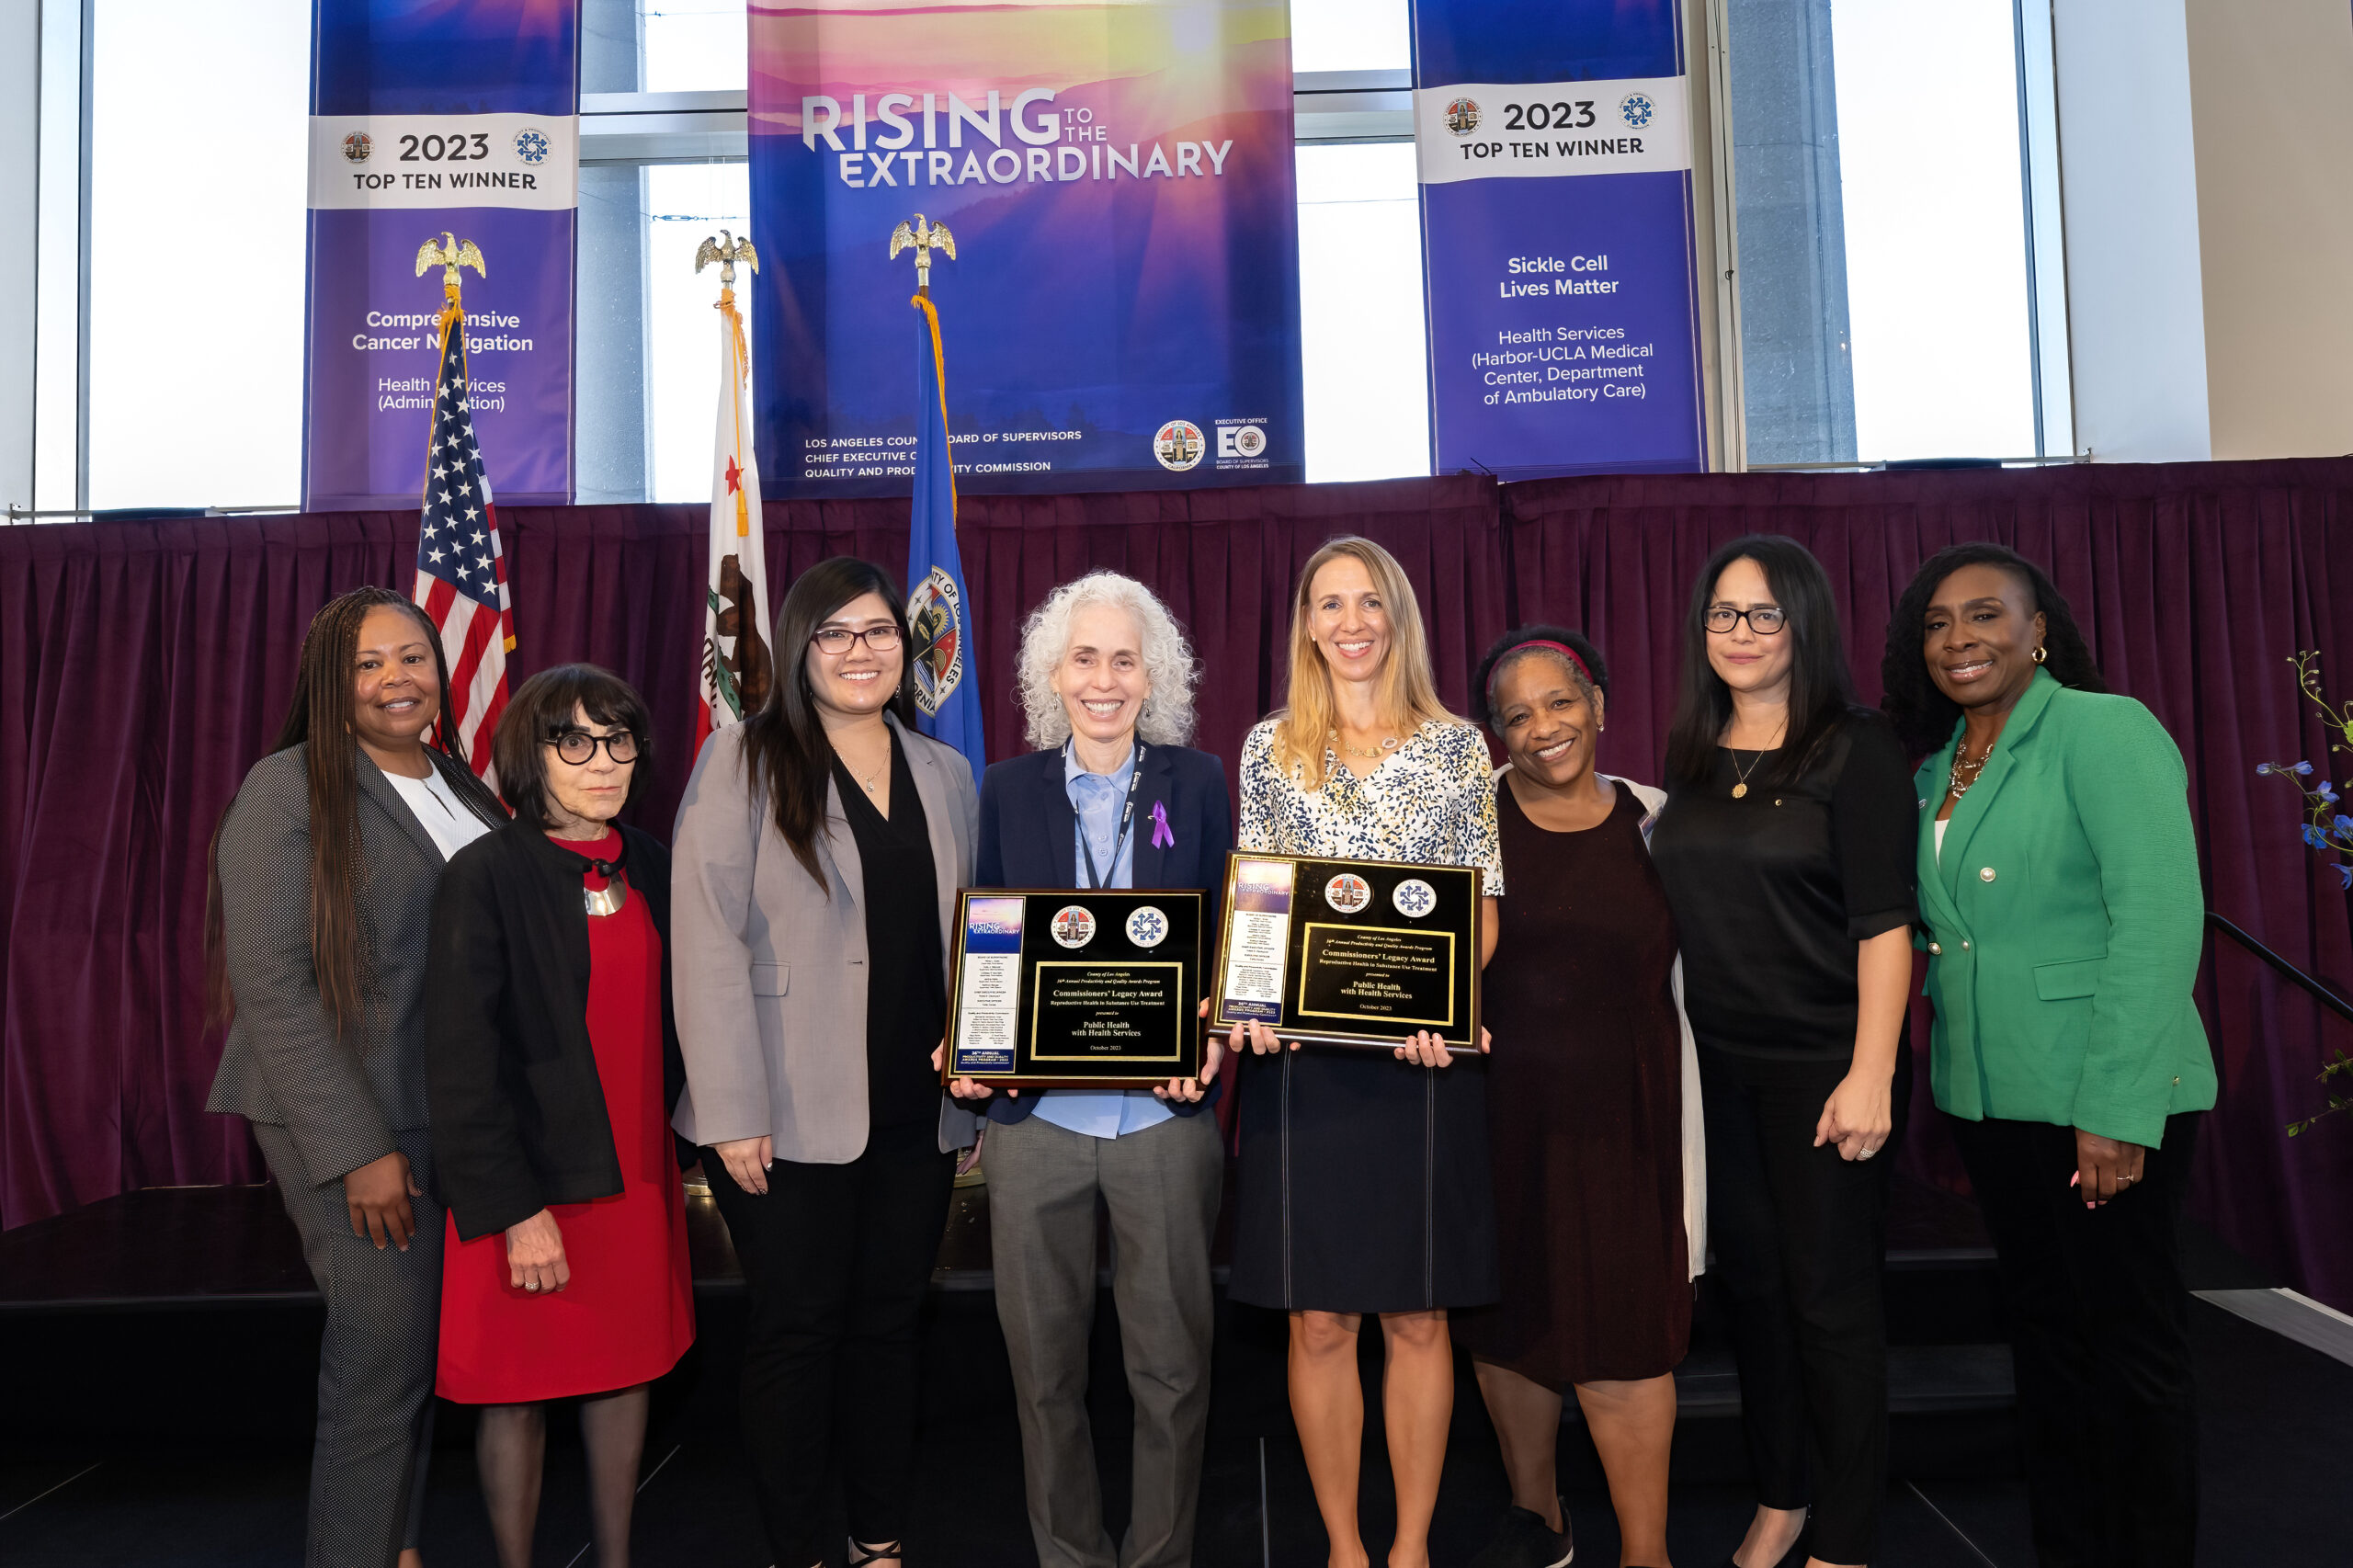 Commissioner’s Legacy Award - Reproductive Care in Substance Use Treatment in Partnership with the Department of Public Health